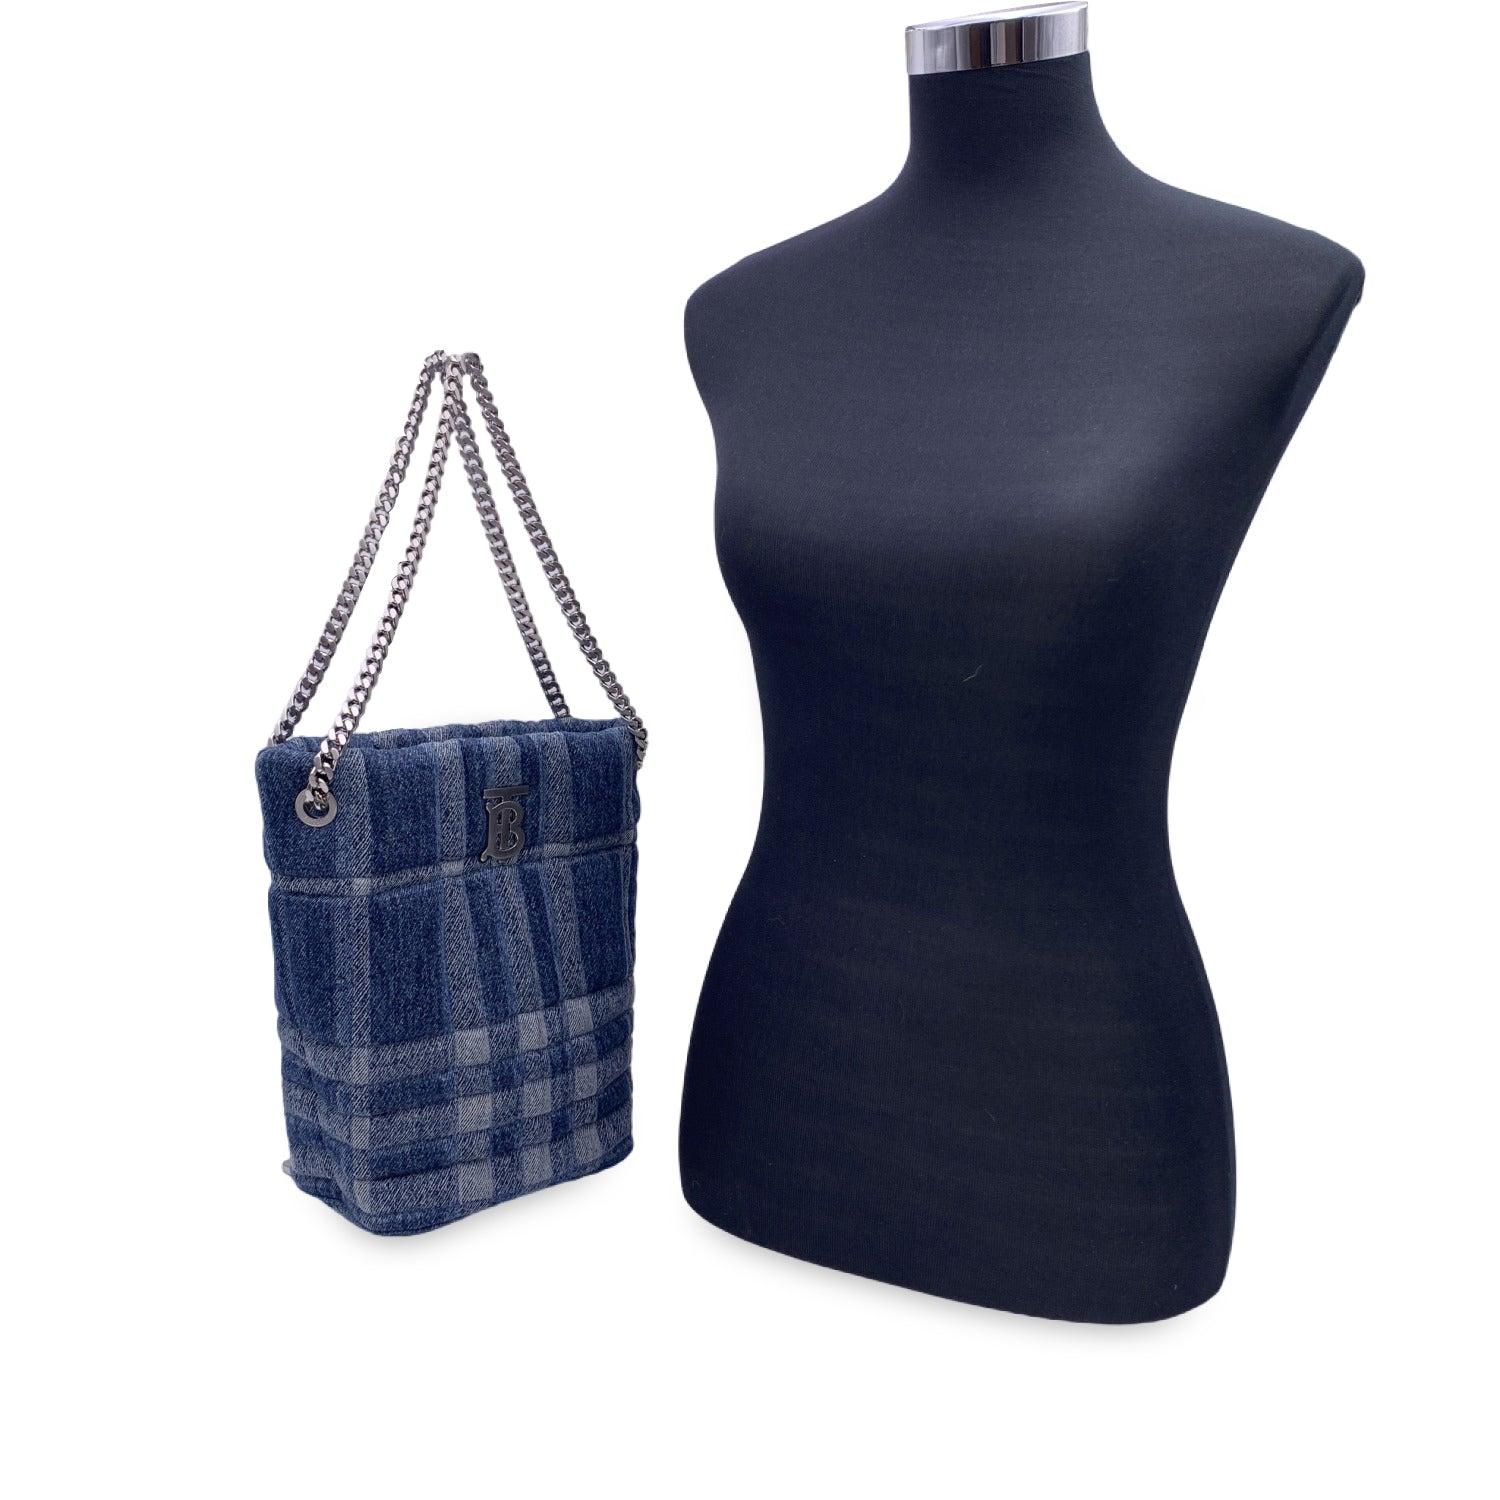 This beautiful Bag will come with a Certificate of Authenticity provided by Entrupy. The certificate will be provided at no further cost

Burberry 'Small Lola' Shoulder bucket bag. Blue quilted denim and silver metal hardware. Magnetic button